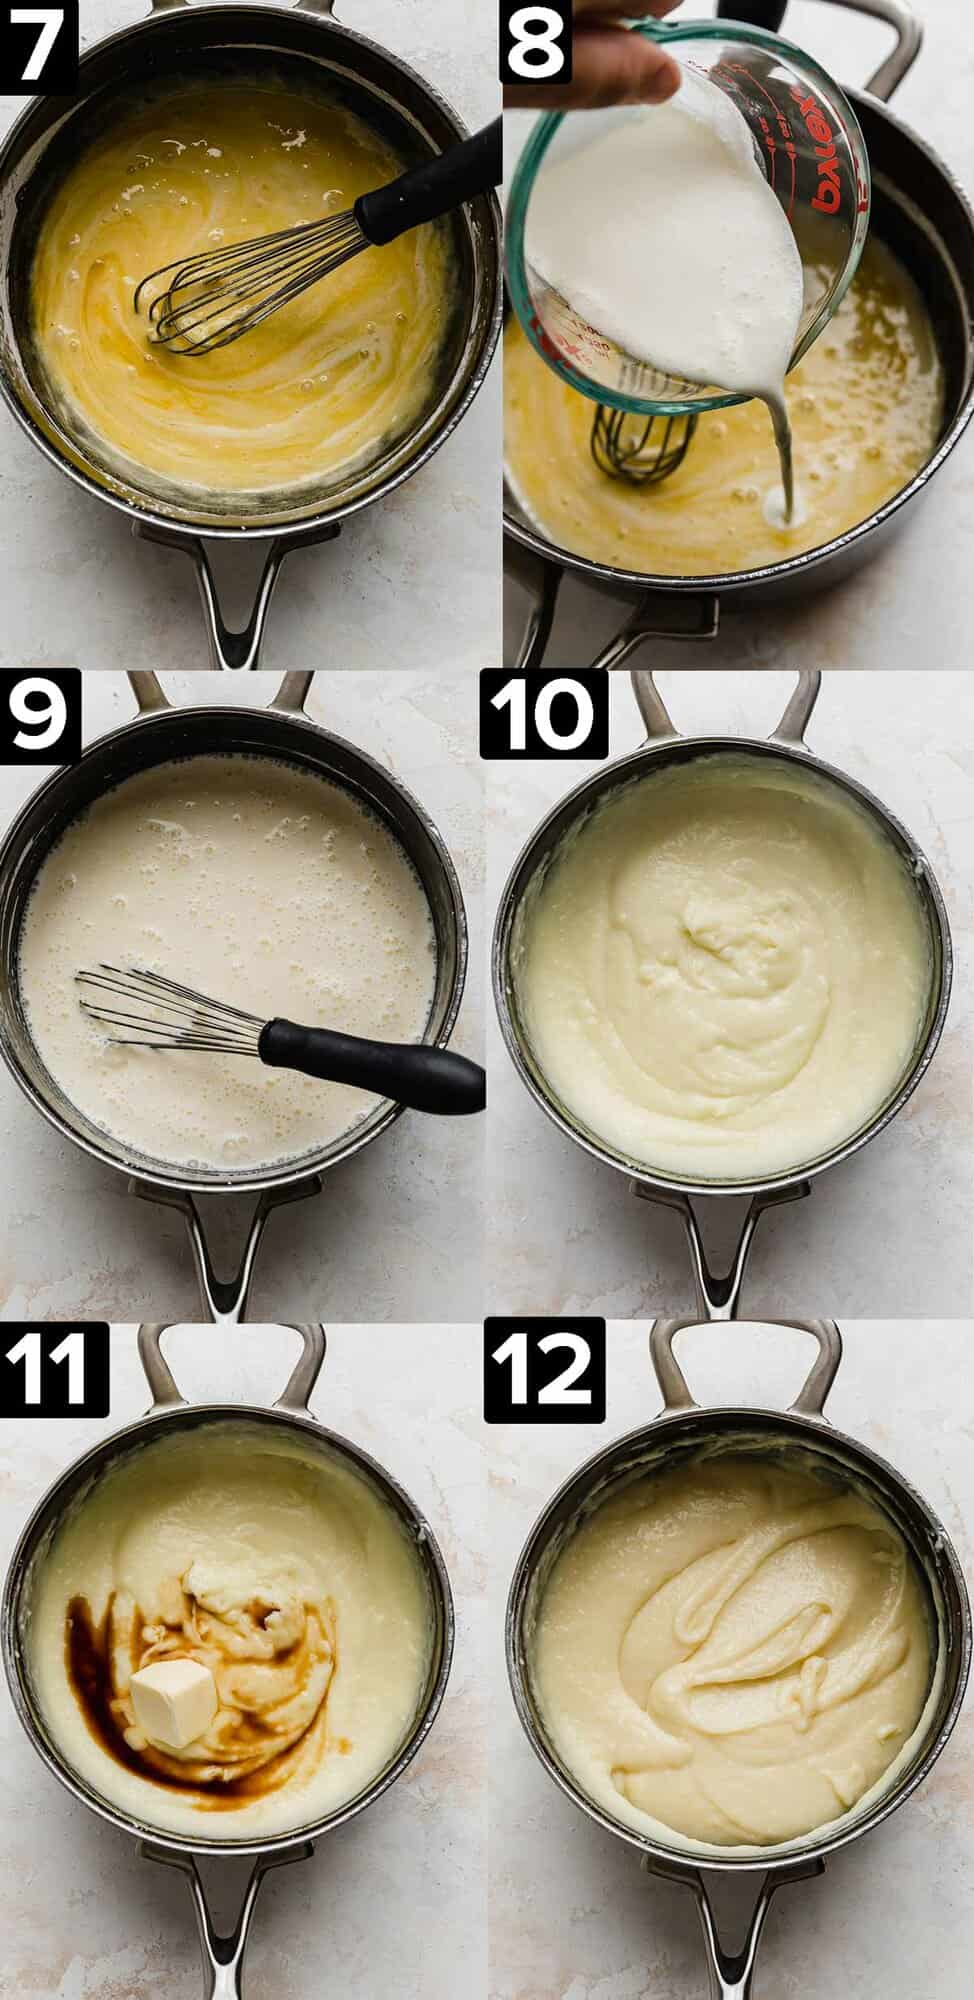 Six photos showing the process of how to make a banana cream pie, all photos are of a black pot on a white background with cream, and butter being added throughout.